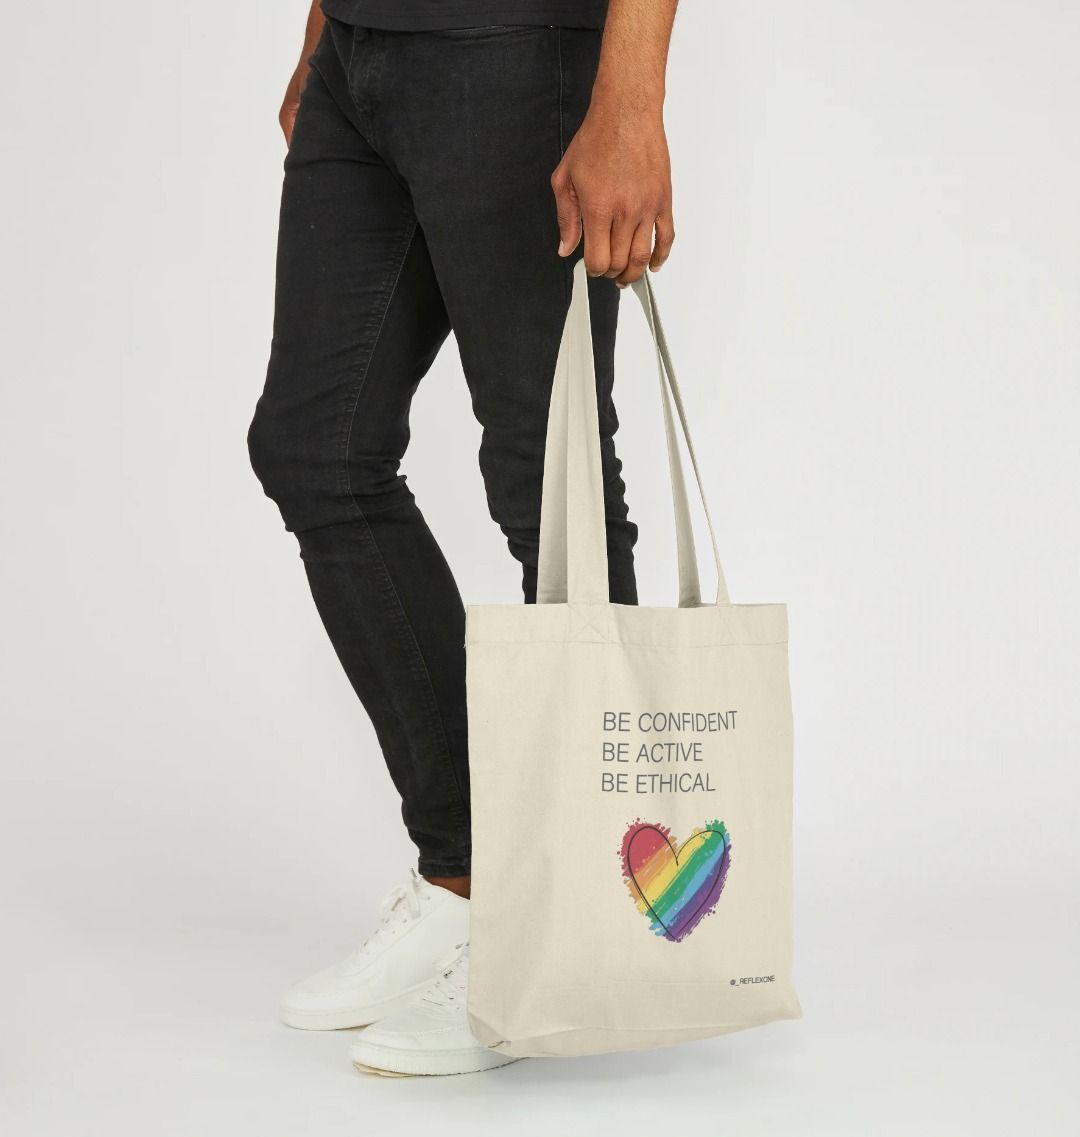 Tote bag - be confident, be active, be ethical